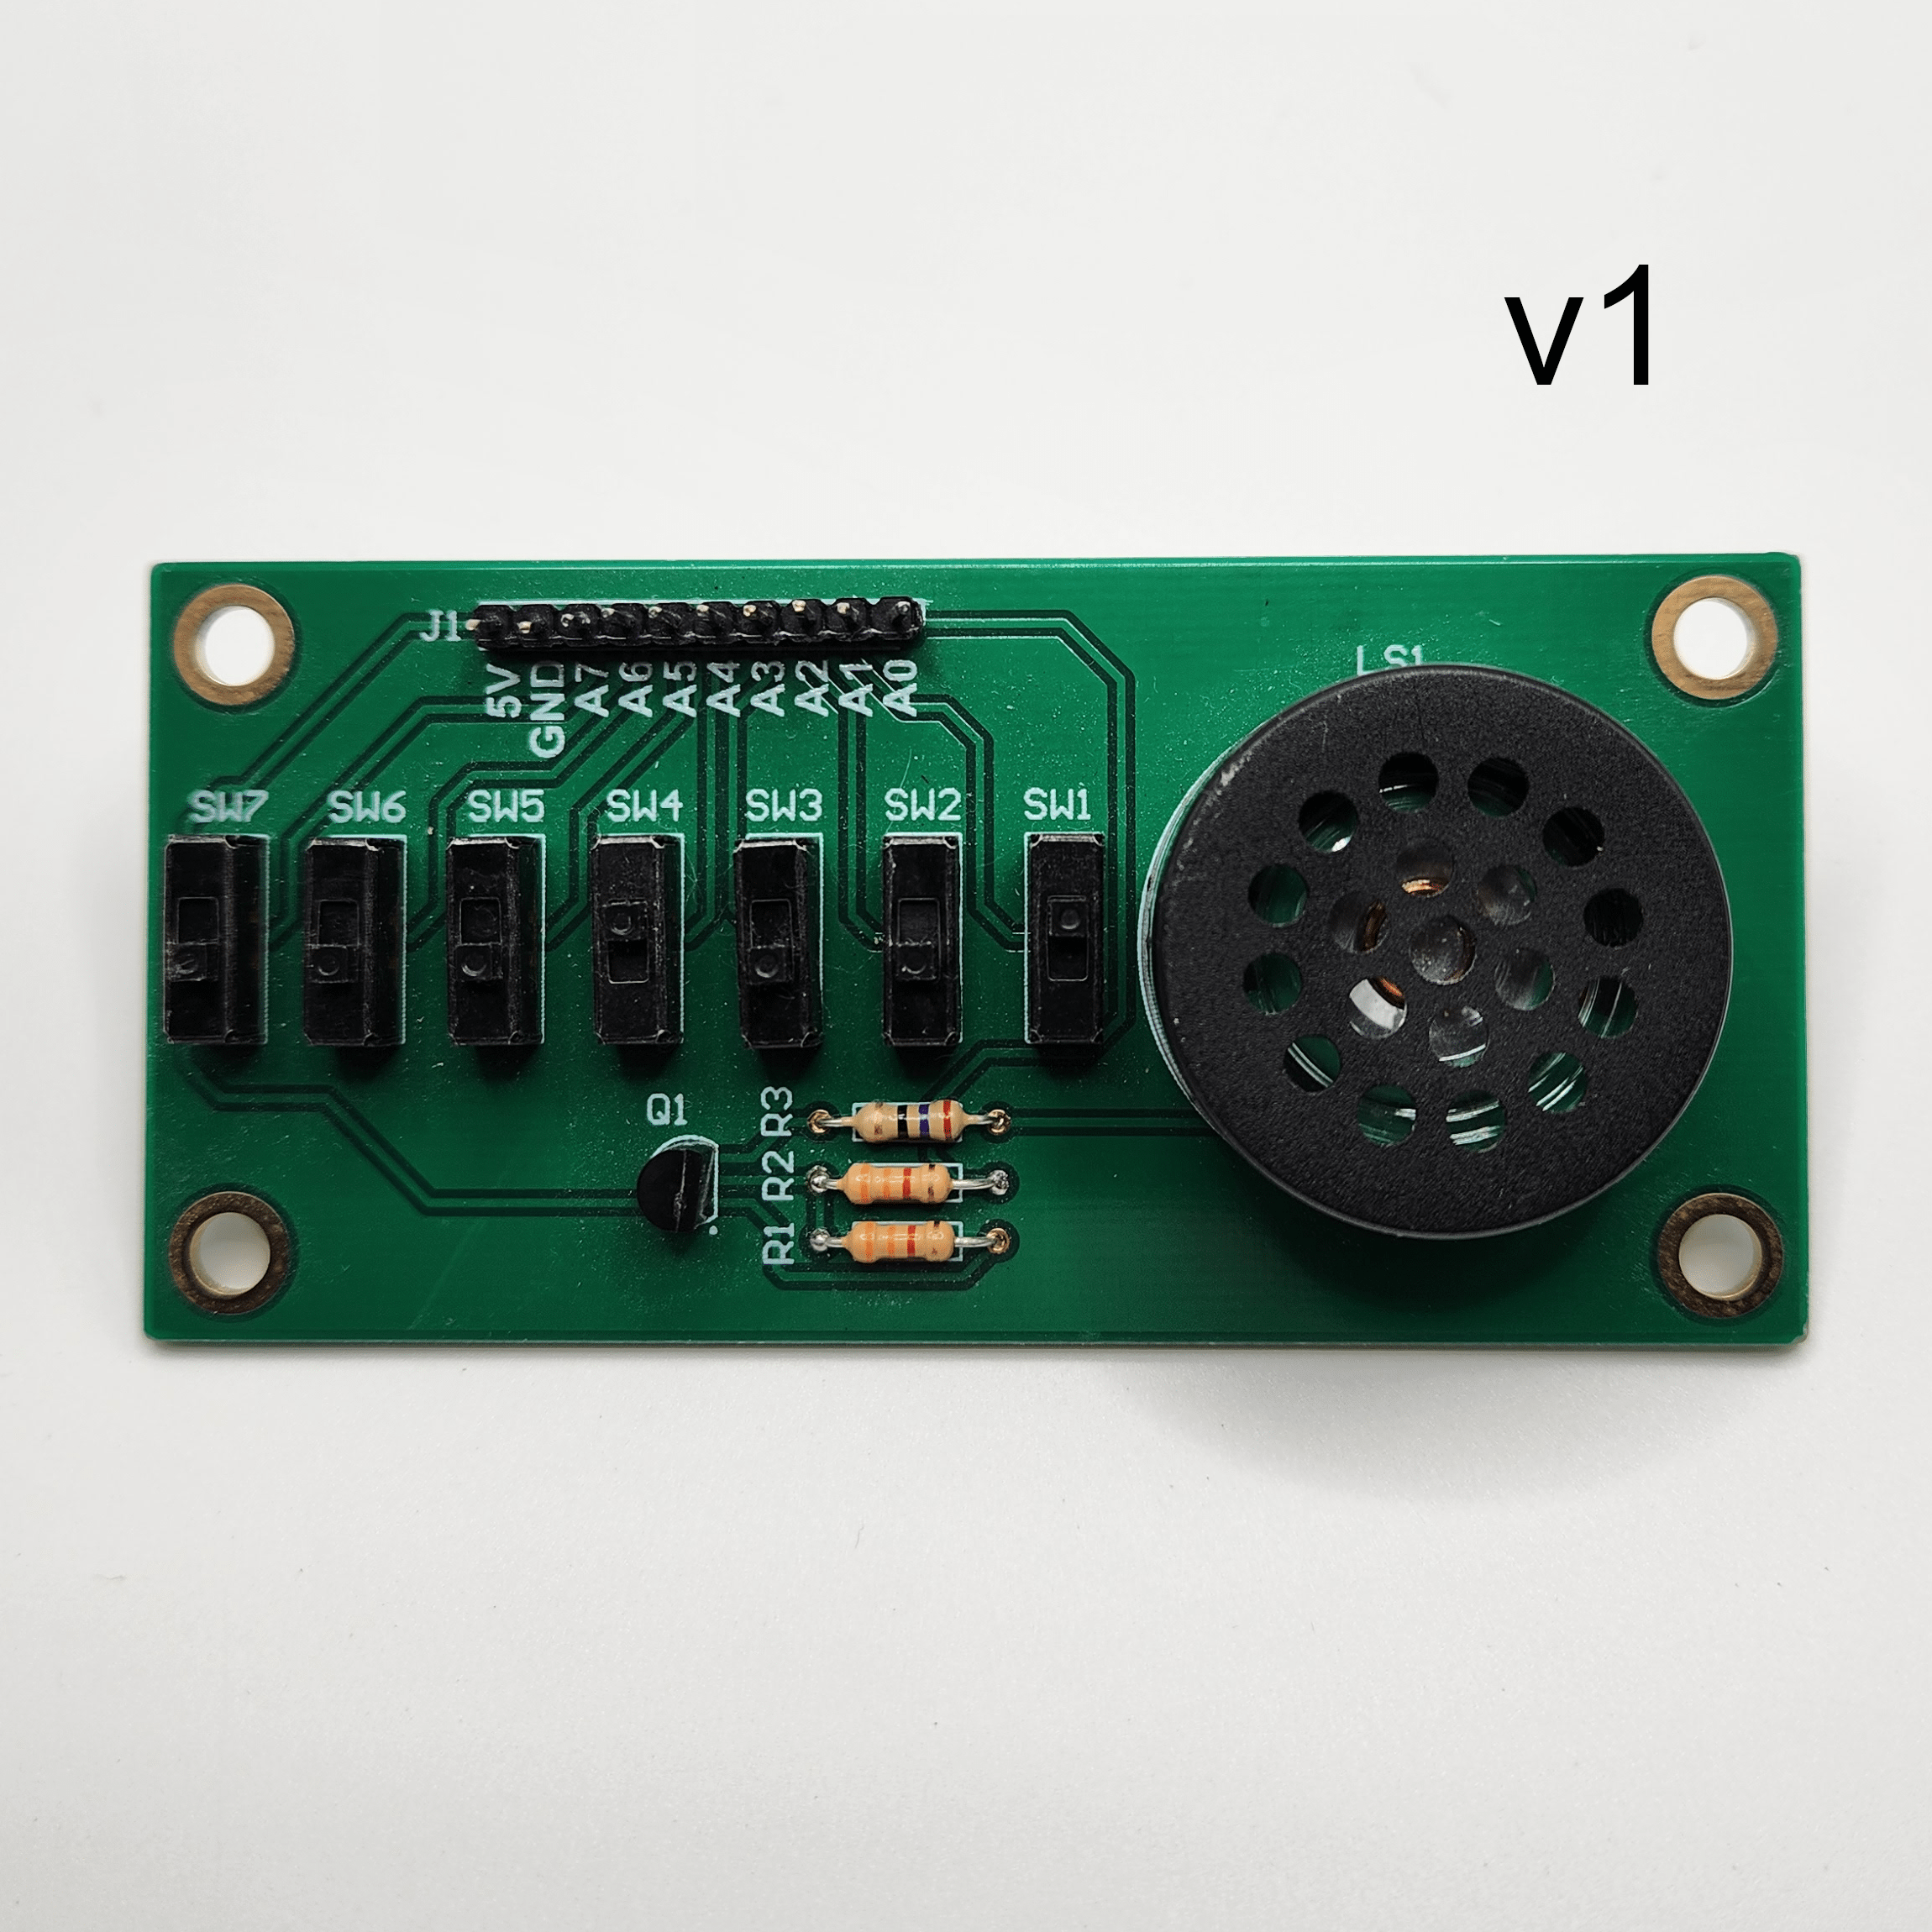 Complete populated Simple Switch and Speaker Demo Board v1 PCB with a text label indicating what version board it is